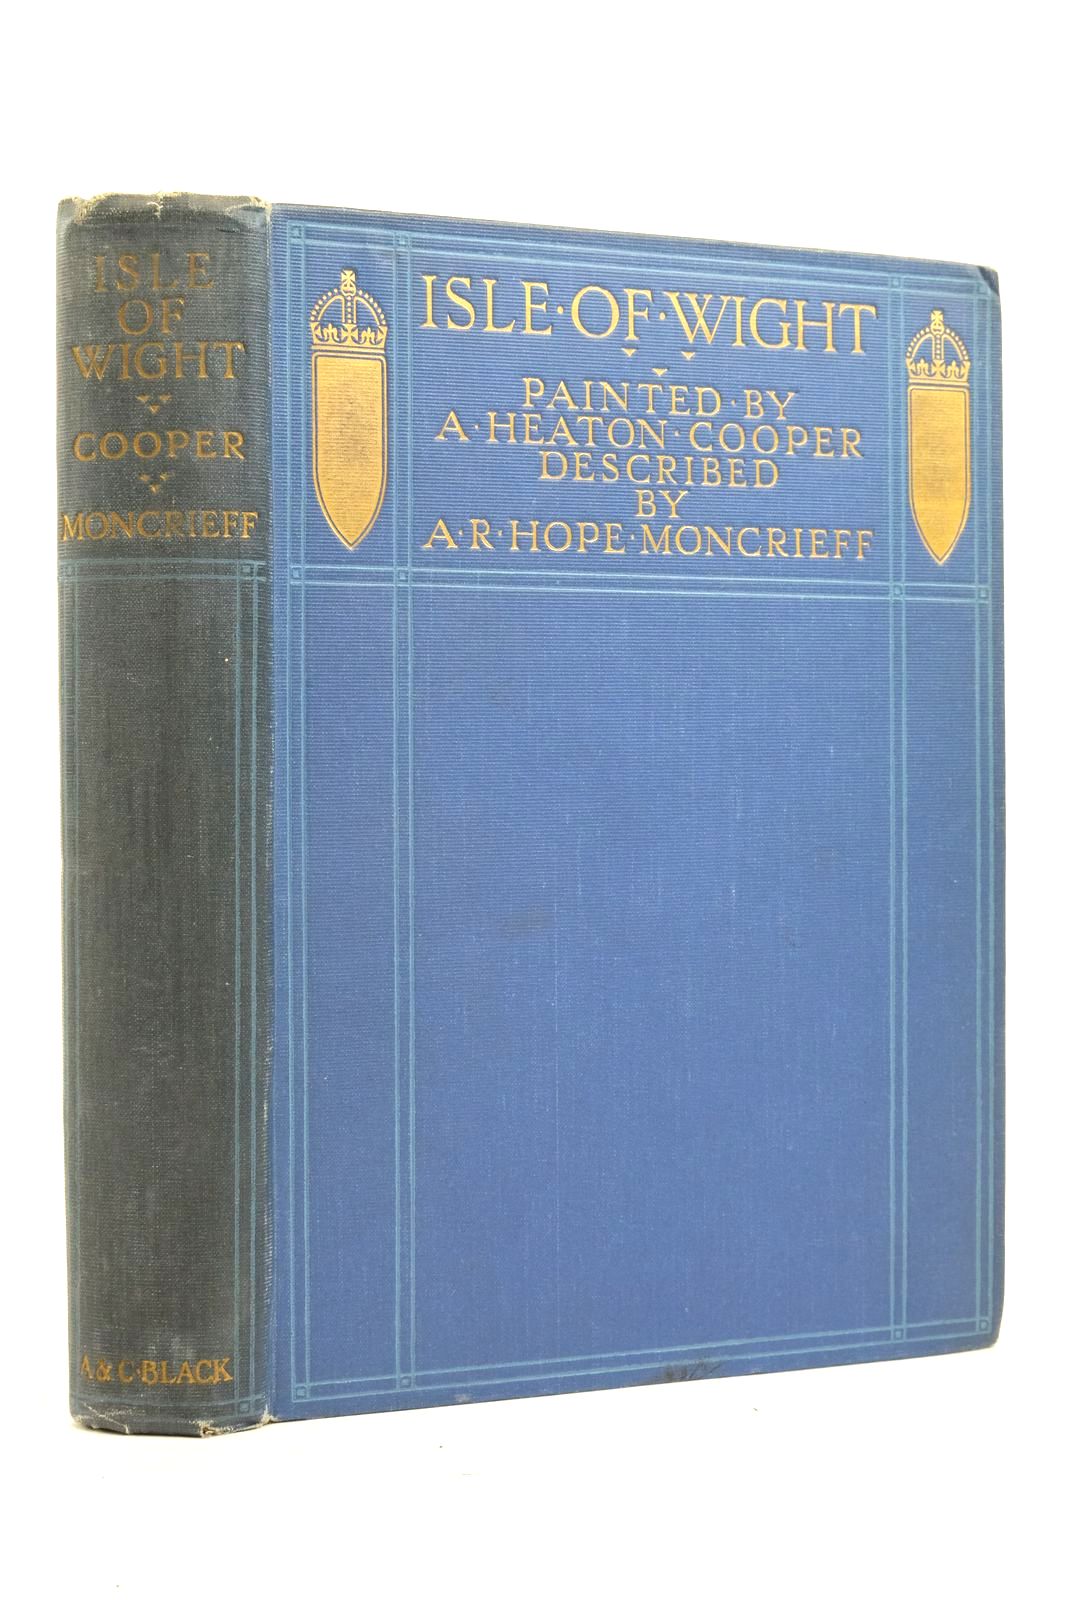 Photo of ISLE OF WIGHT written by Moncrieff, A.R. Hope illustrated by Cooper, A. Heaton published by Adam &amp; Charles Black (STOCK CODE: 2137597)  for sale by Stella & Rose's Books